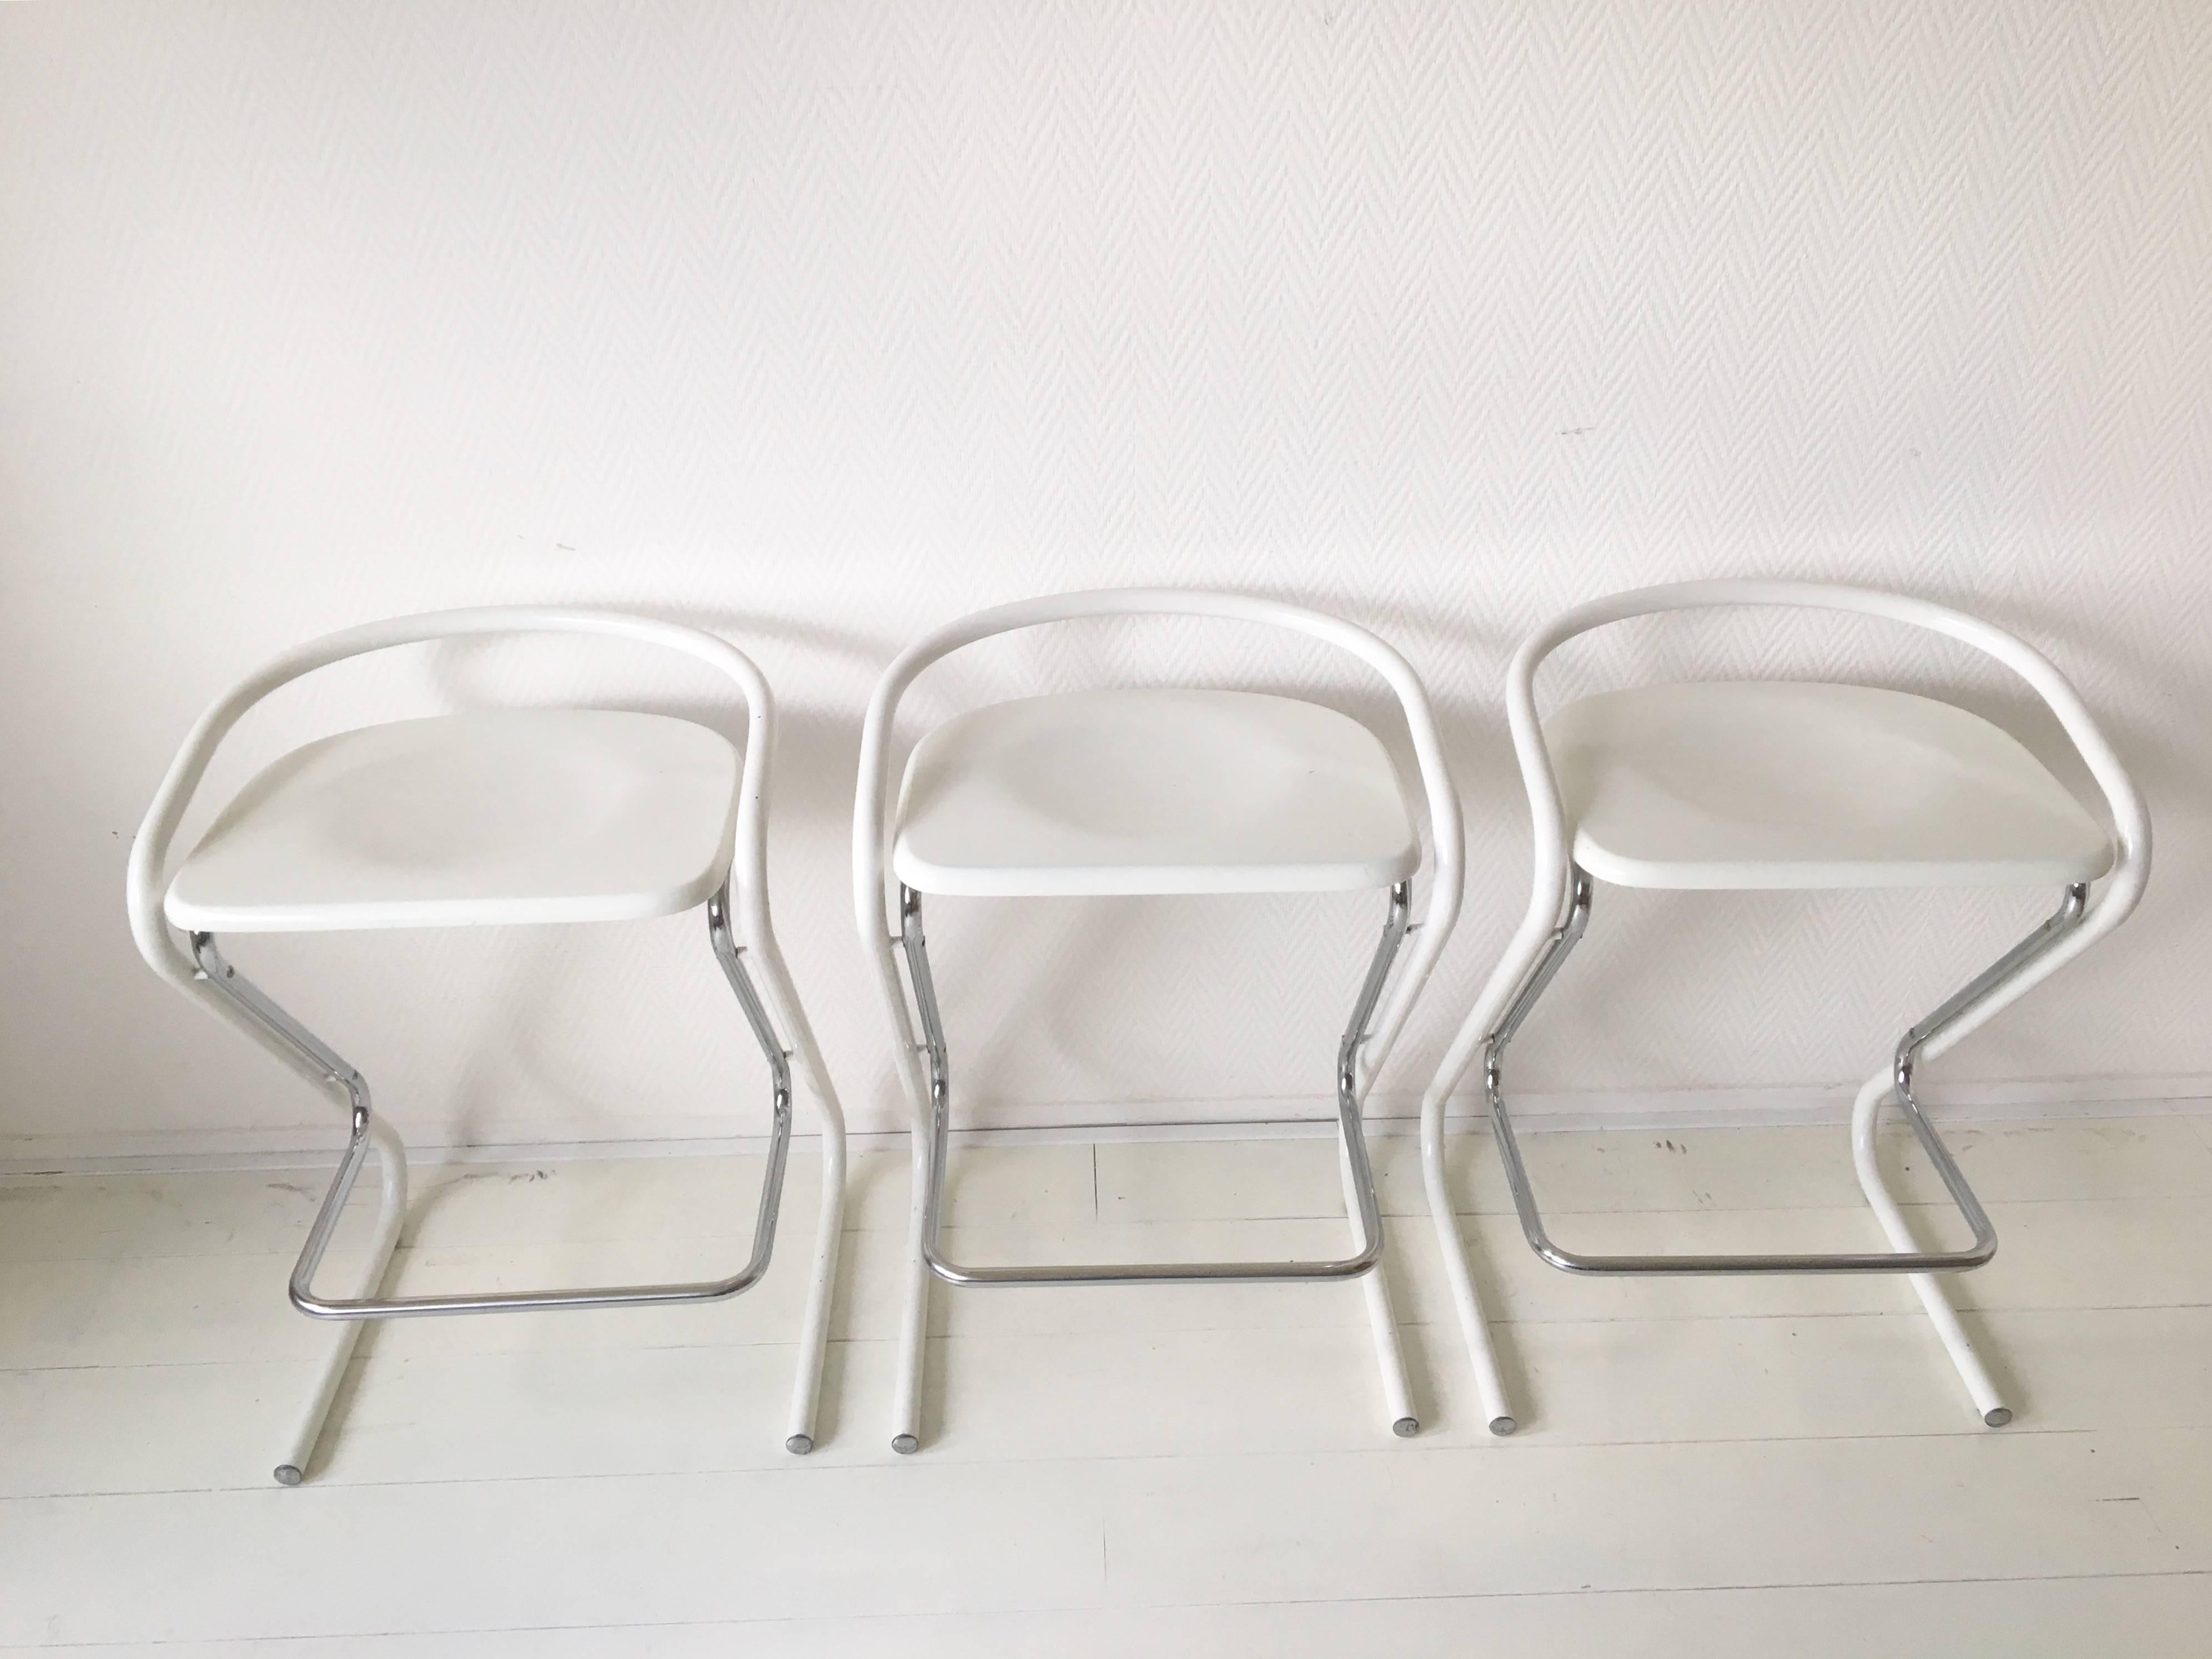 This wonderful set of three feature a white and chromed metal base with comfortable seatings of wood. They were designed and manufactured in Italy. The stools remain in good vintage condition, with some signs of age and use. Marked with the